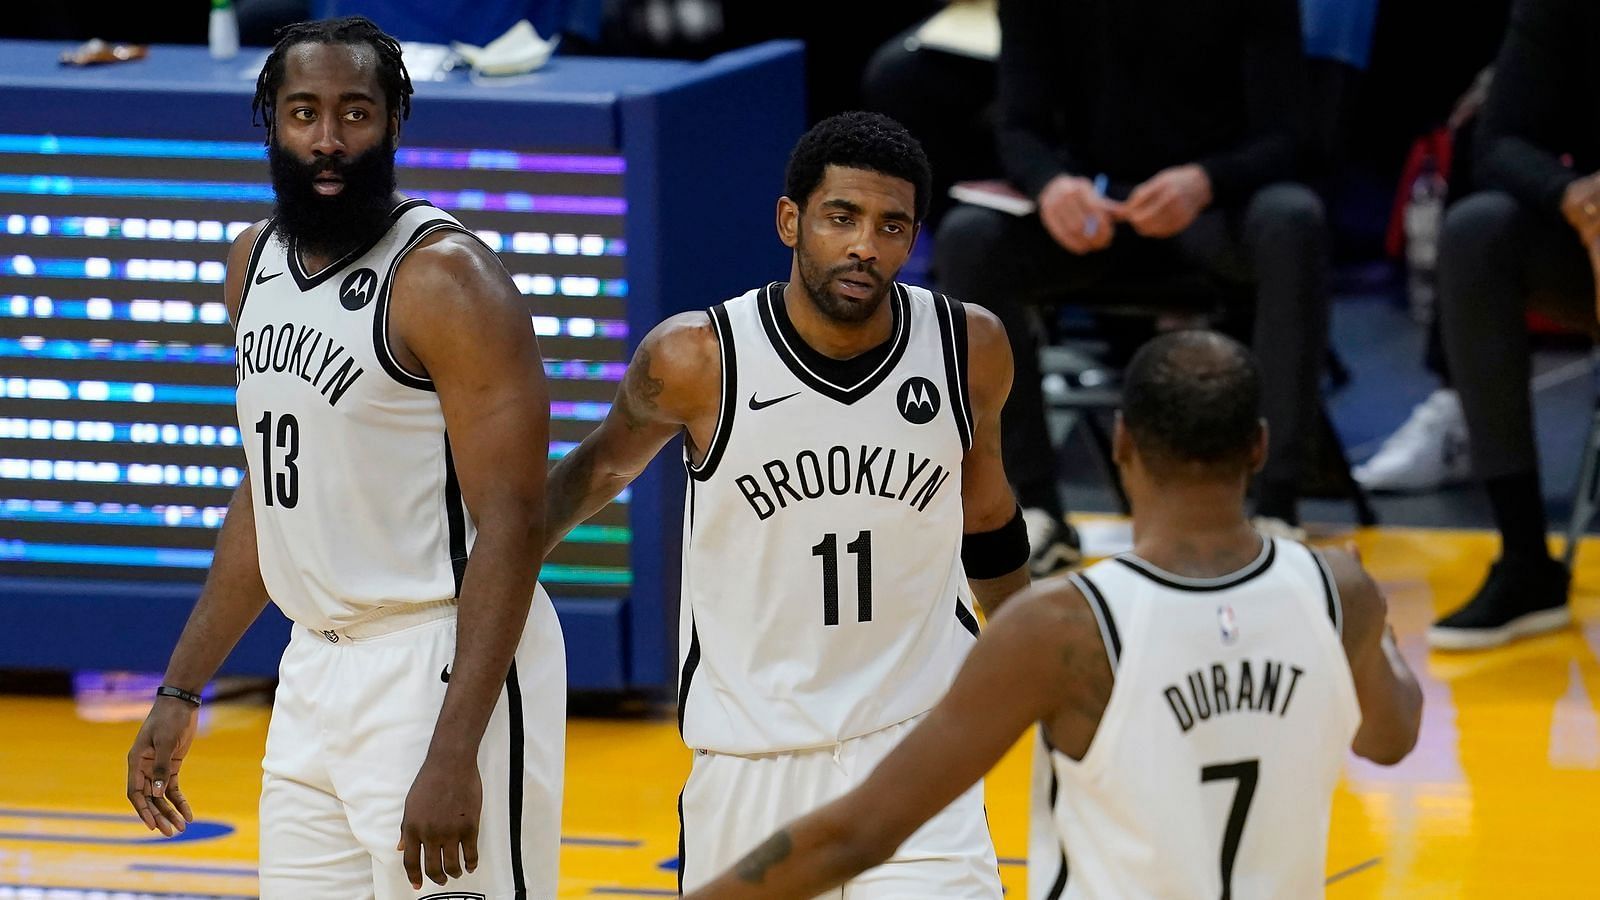 The Brooklyn Nets will need the best versions of James Harden and Kyrie Irving to help Kevin Durant carry the Brooklyn Nets to the title. [Photo: Sky Sports]